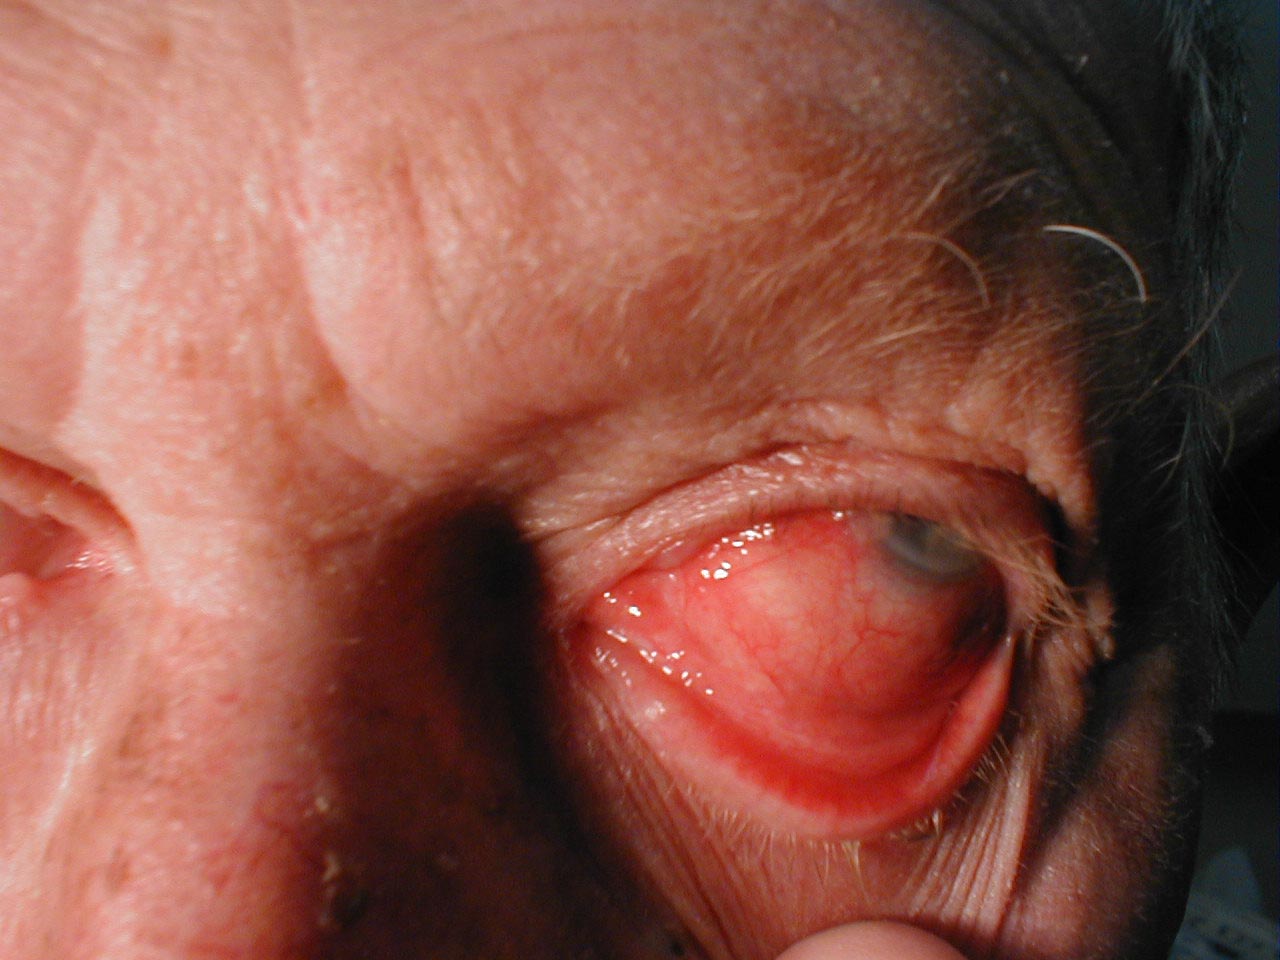 Conjunctivitis: Note inflamed conjunctiva of sclera and reflection onto underside of eyelid.